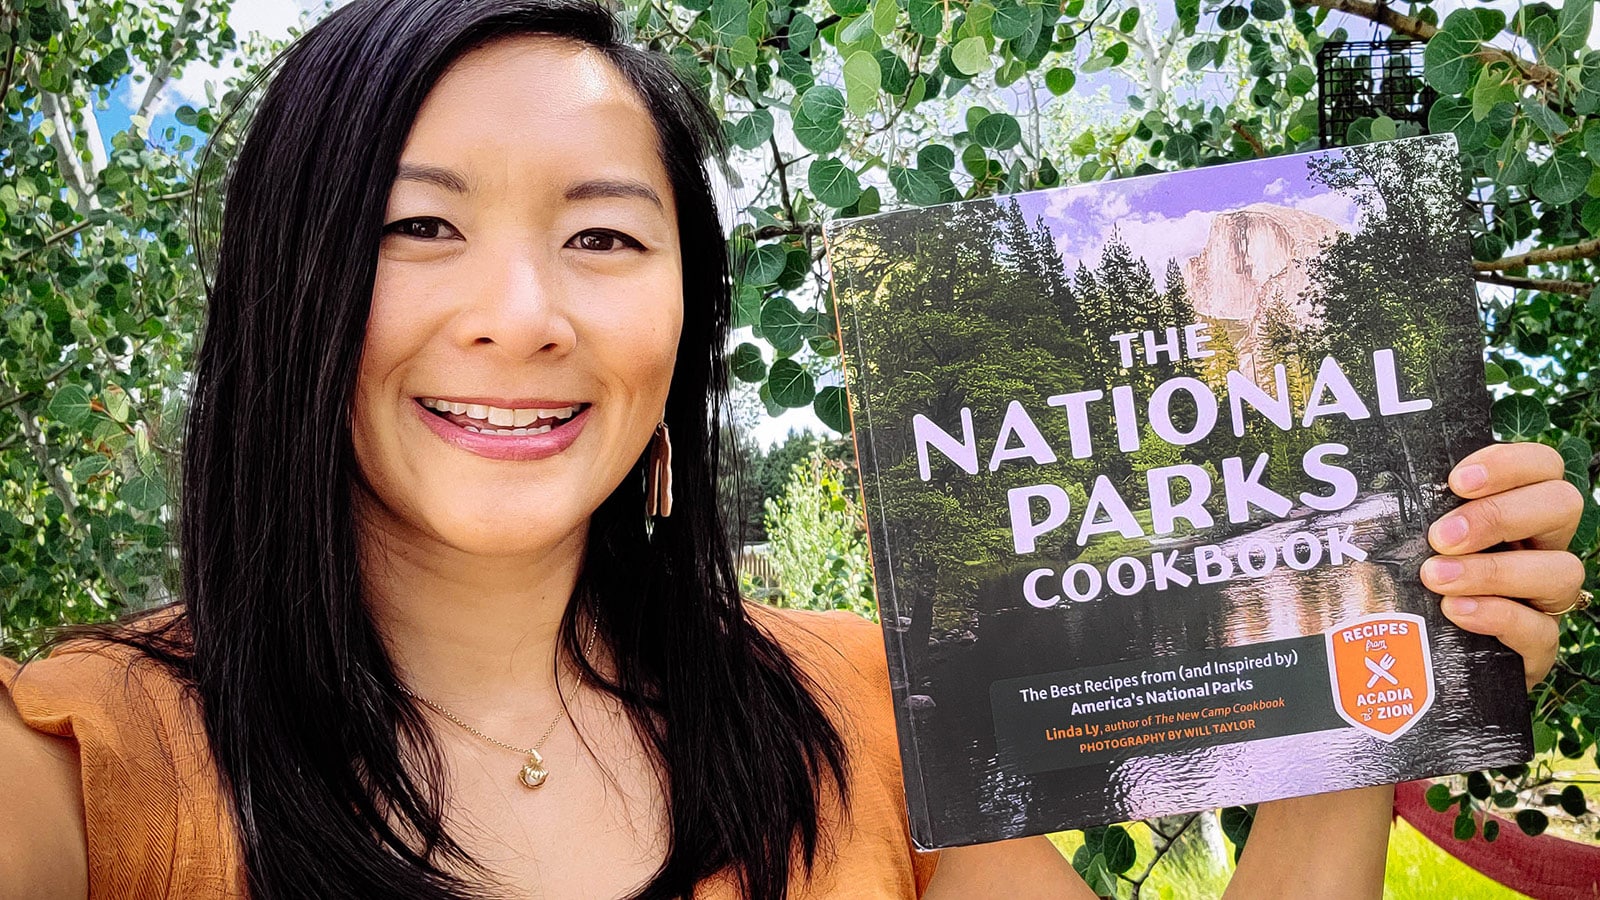 Author Linda Ly with her new book The National Parks Cookbook